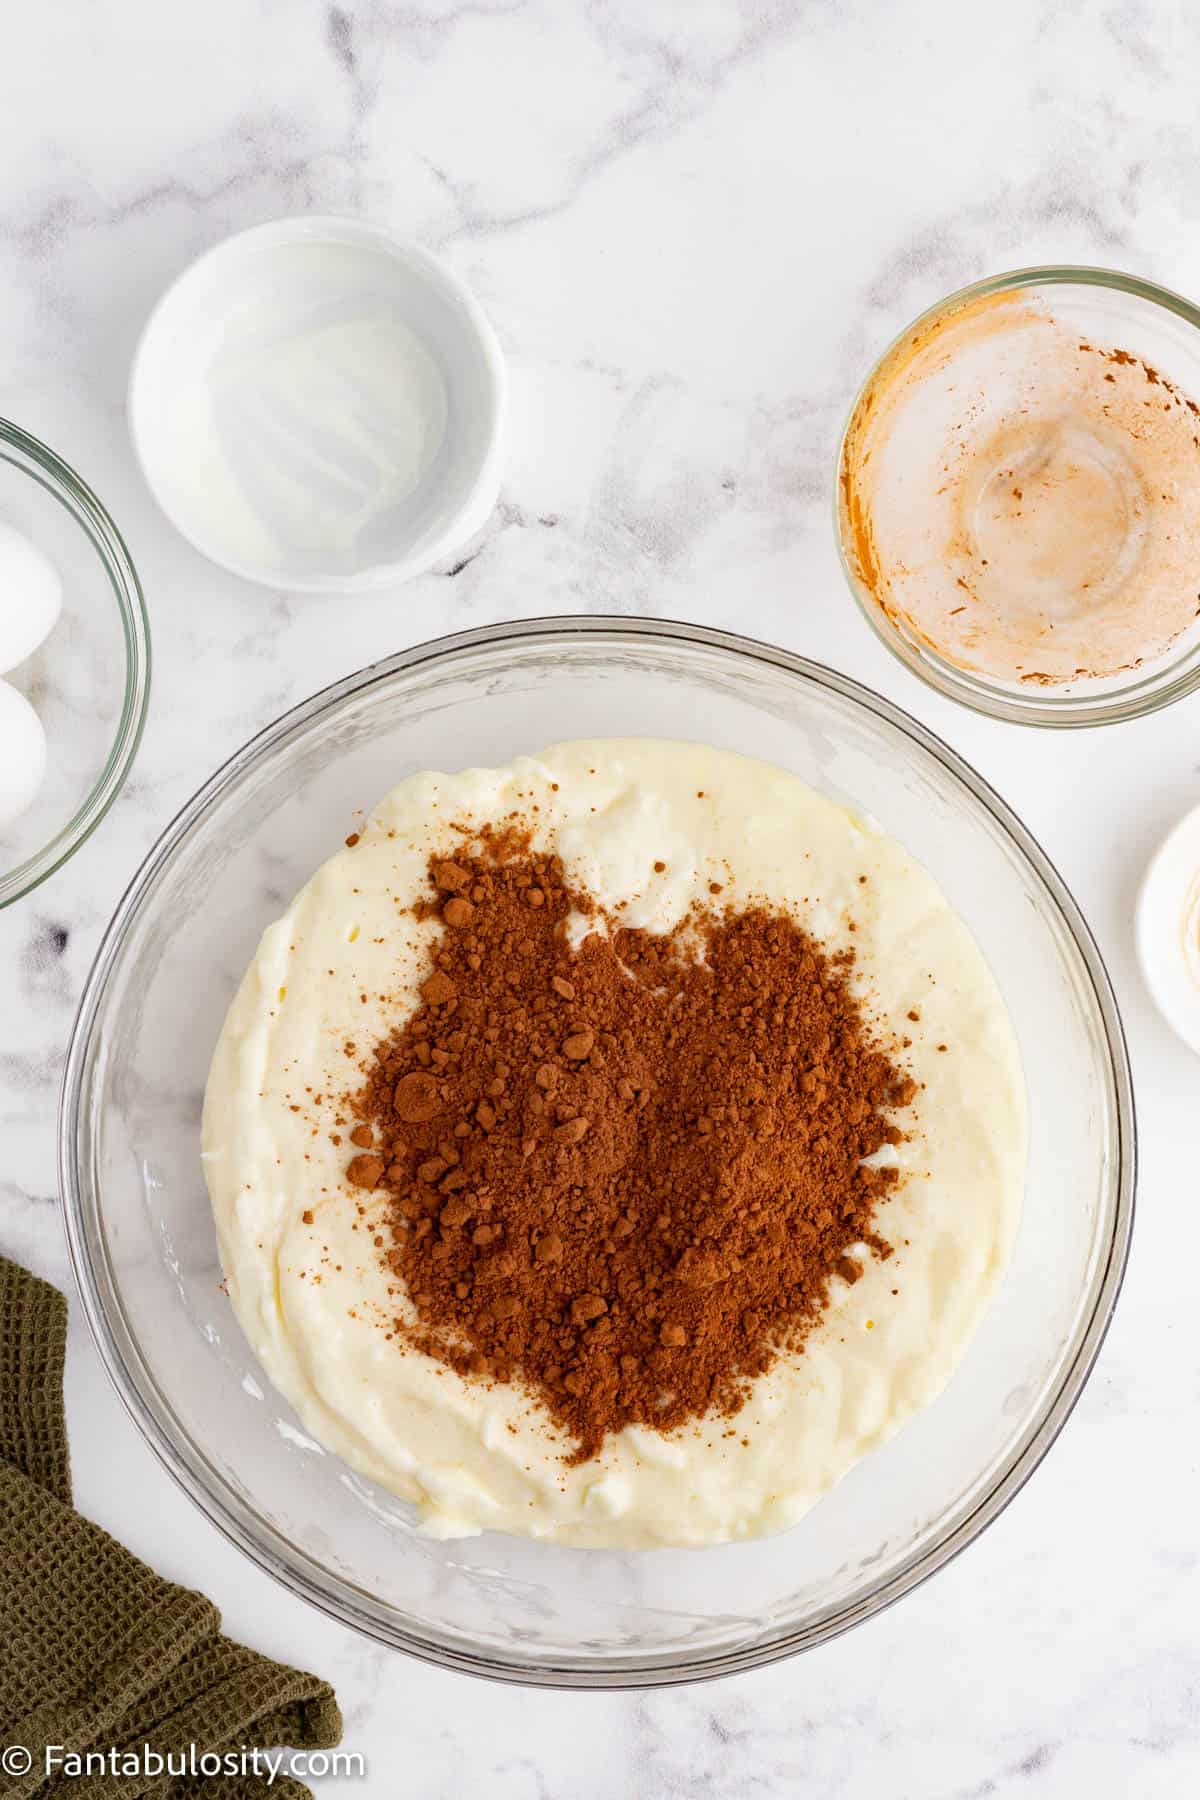 Cocoa powder has been added to a cheesecake filling in a glass mixing bowl